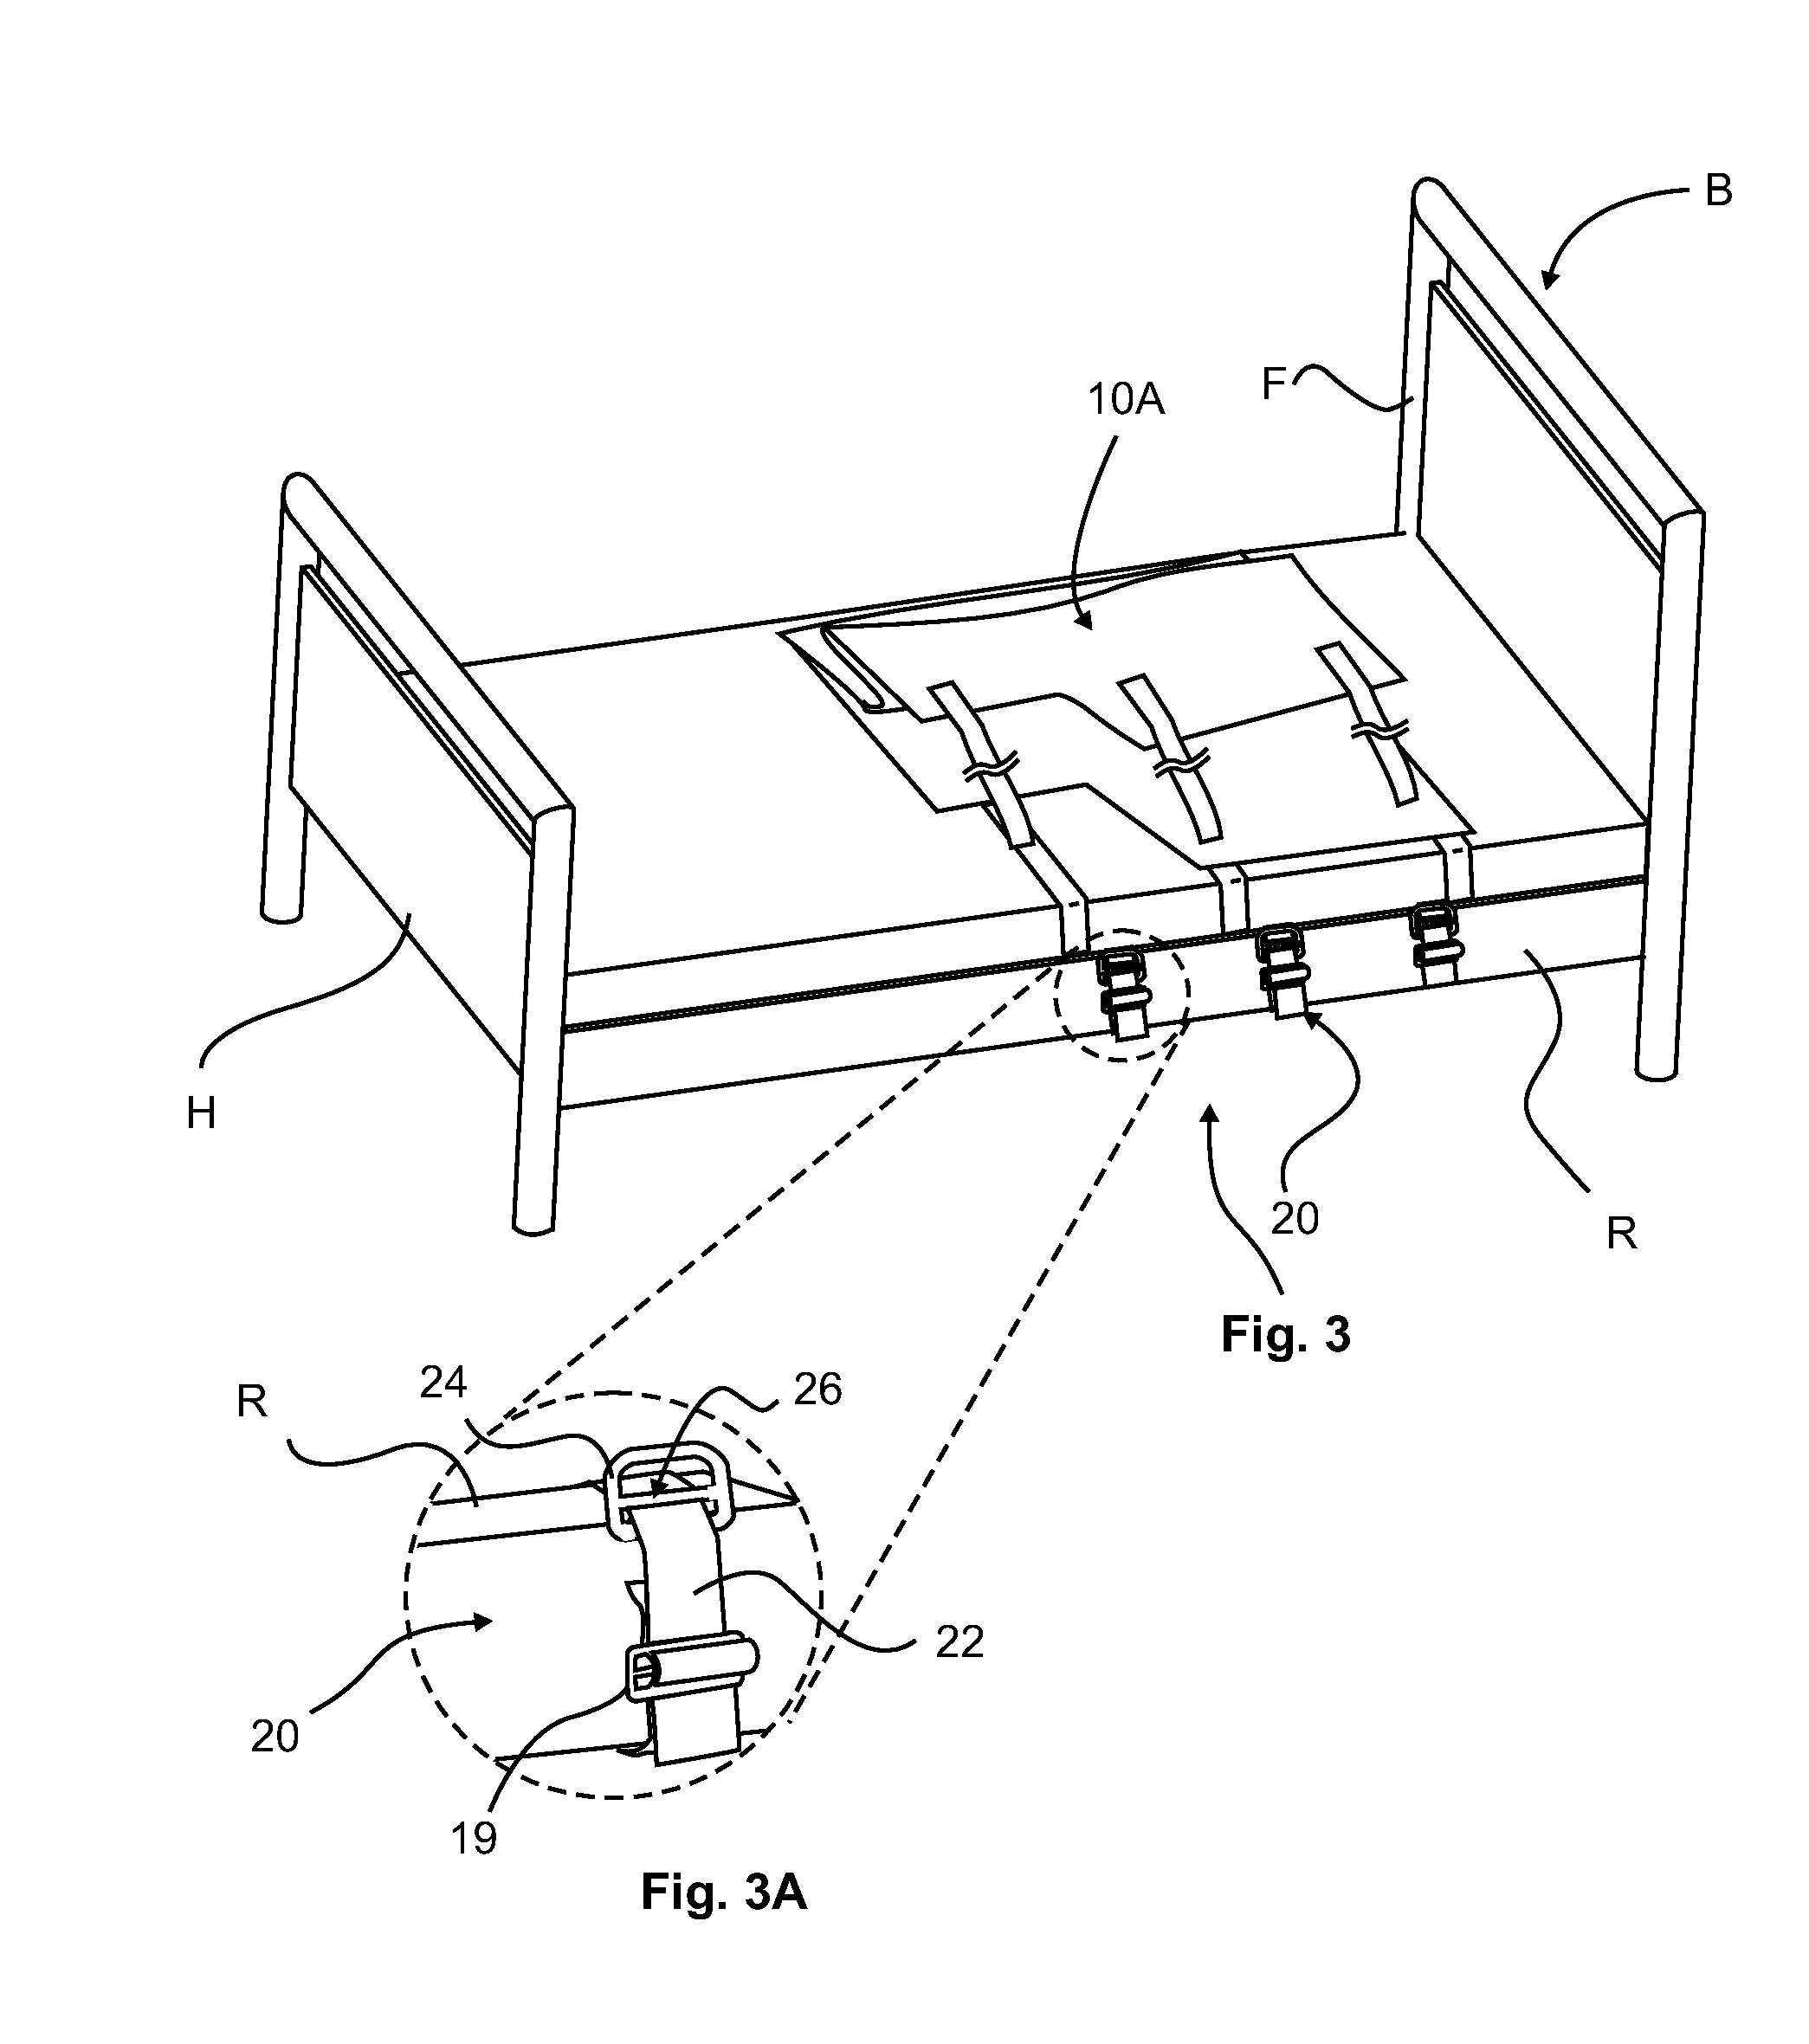 Body rotation and securing sling and methods of use